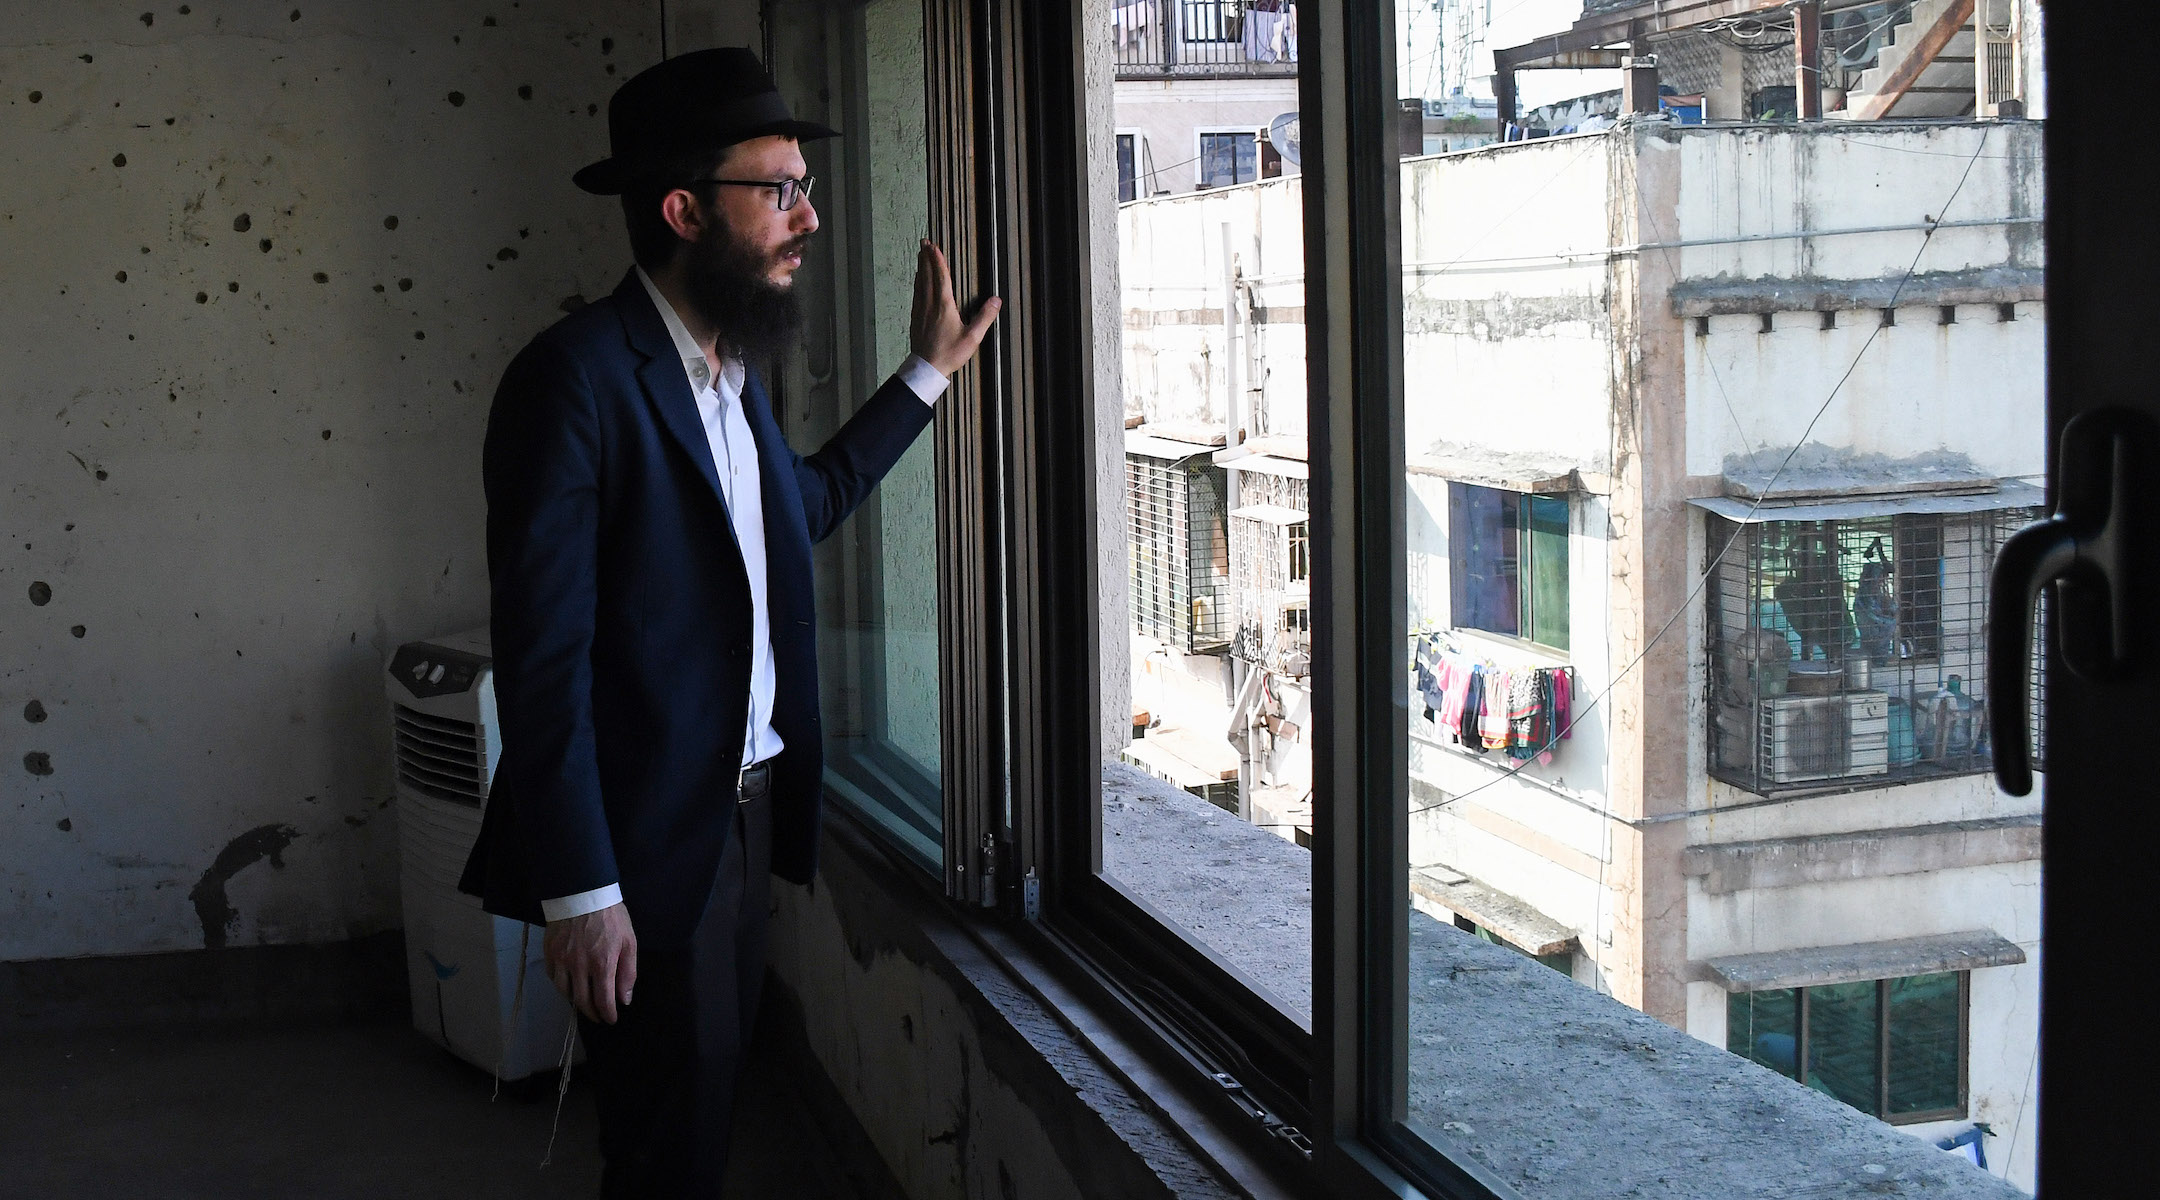 Rabbi Israel Kozlovsky, director of Mumbai's Chabad center, looks out of a window of the center, in front of a wall pock-marked with bullet holes from the 2008 terror attack. (Ashish Vaishnav/SOPA Images/LightRocket via Getty Images)